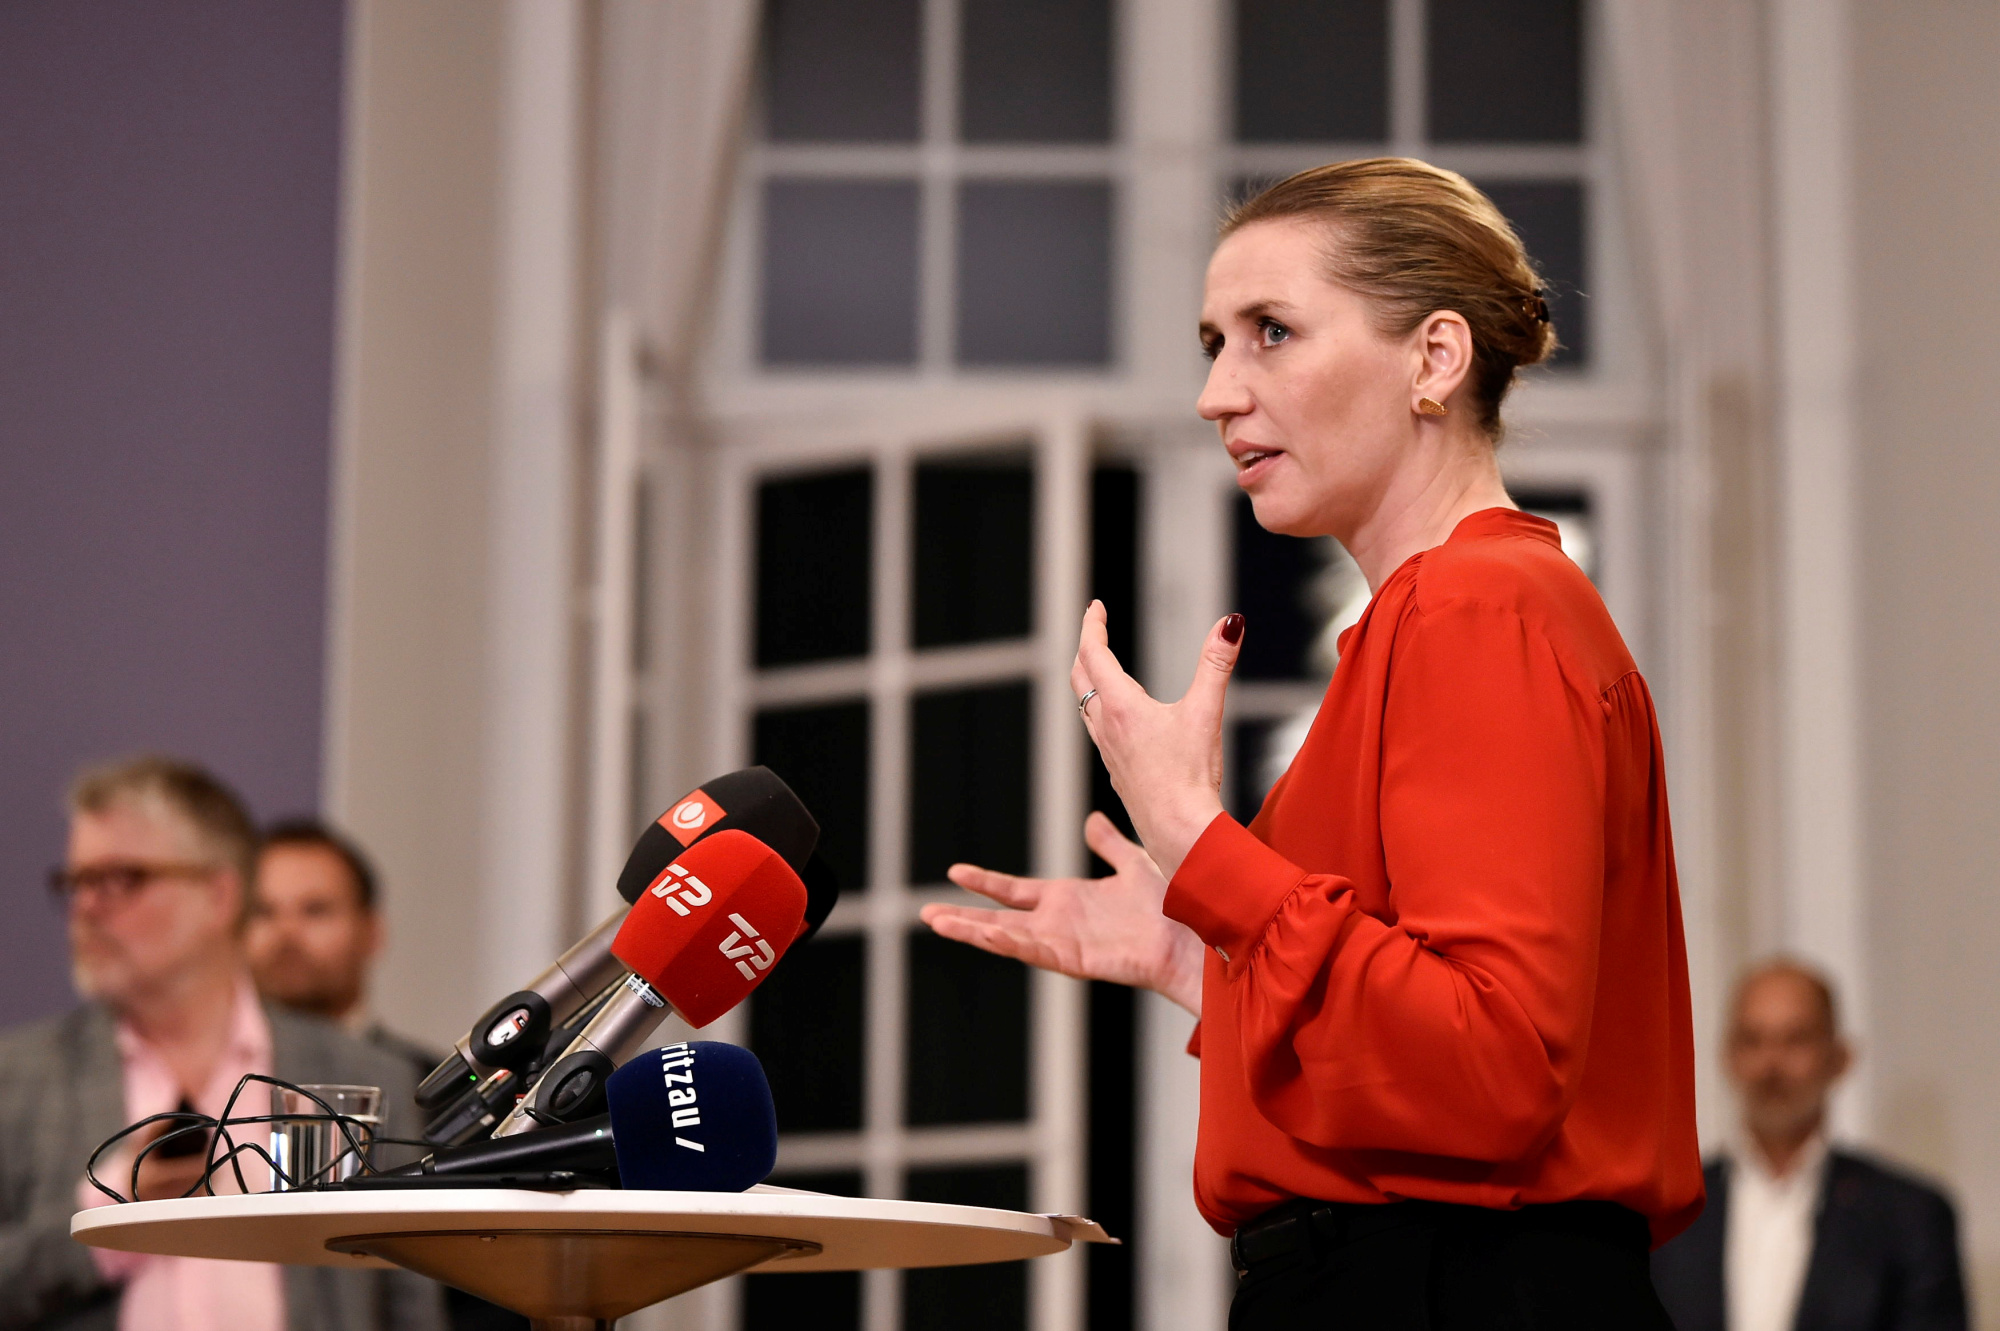 Mette Frederiksen addresses the press after finalizing government negotiations at Christiansborg Castle in Copenhagen shortly after midnight on Wednesday. | RITZAU SCANPIX / VIA REUTERS